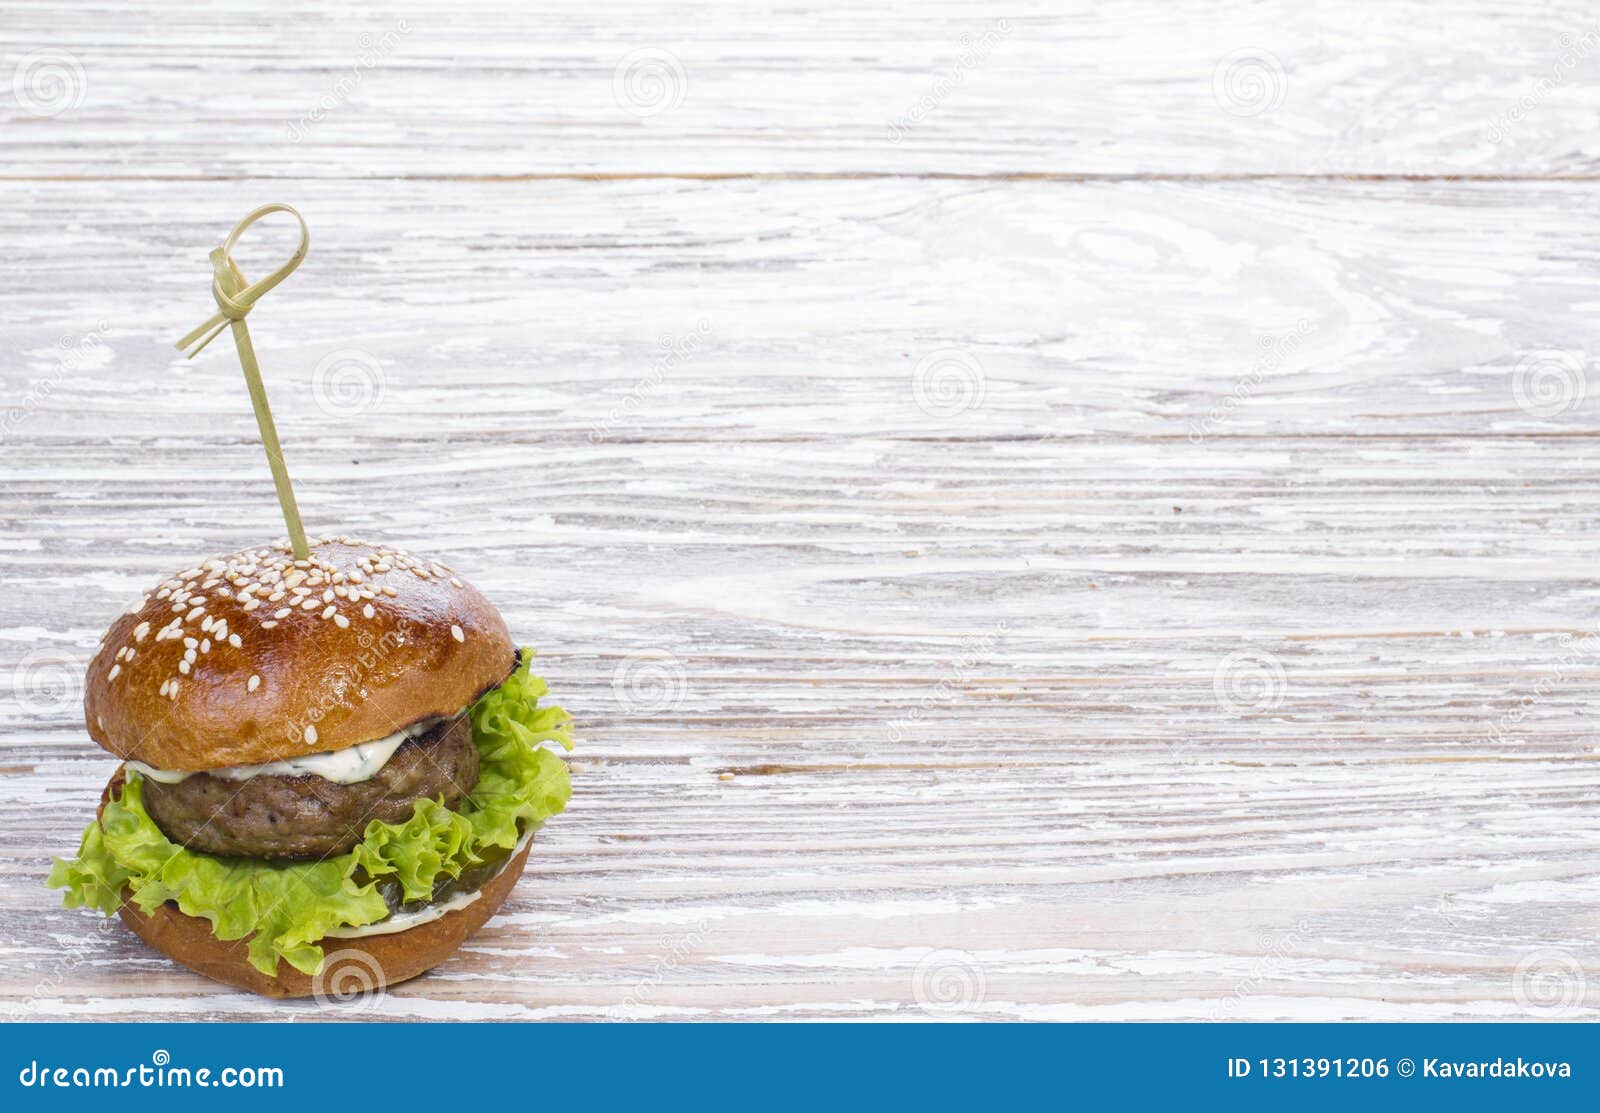 Fast food on wooden table stock photo. Image of hamburger - 131391206